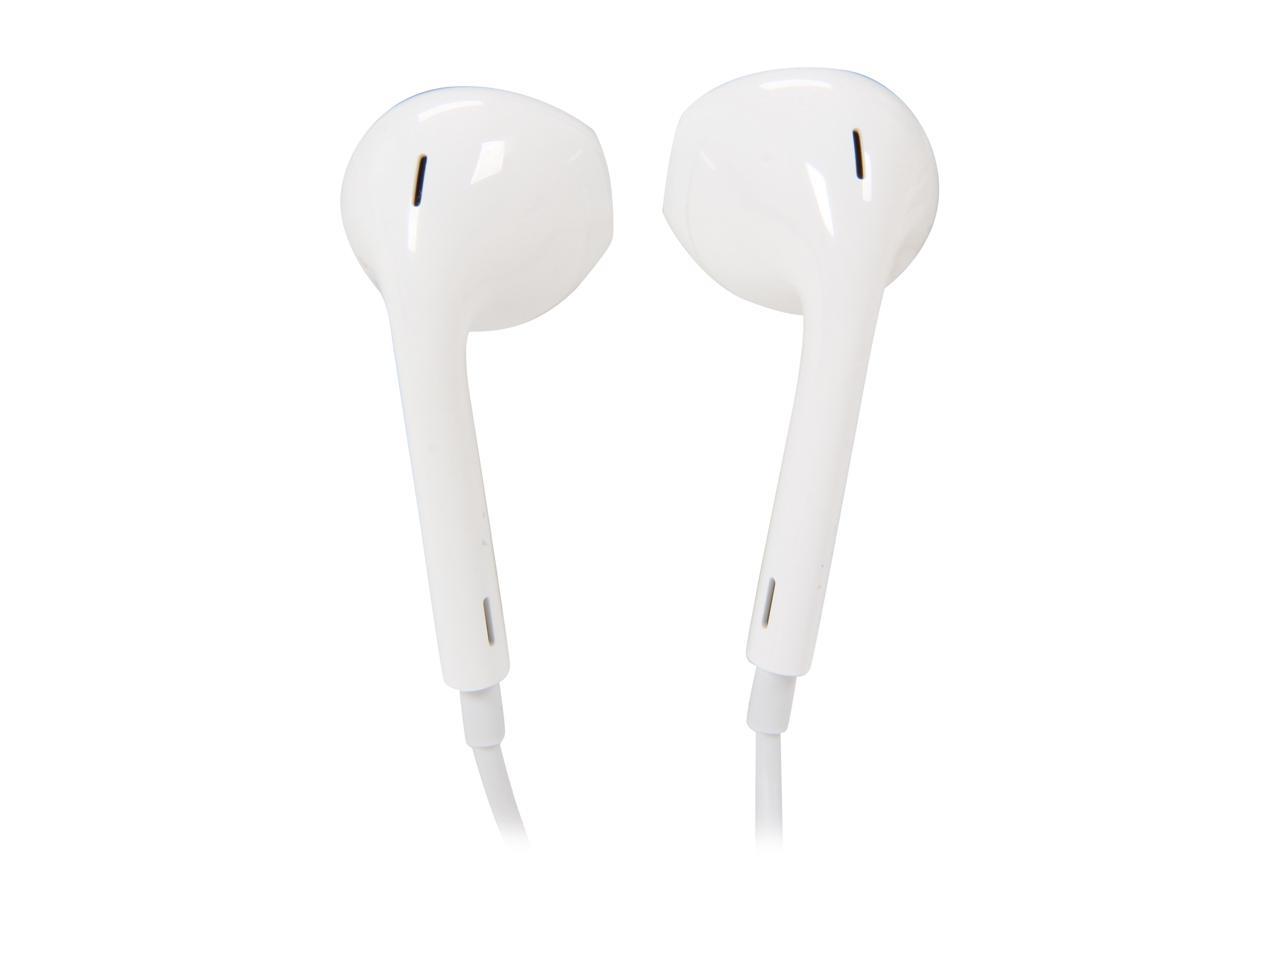 Apple Earpod White Md7ll A 3 5mm Connector Earpods With Remote And Mic Newegg Com